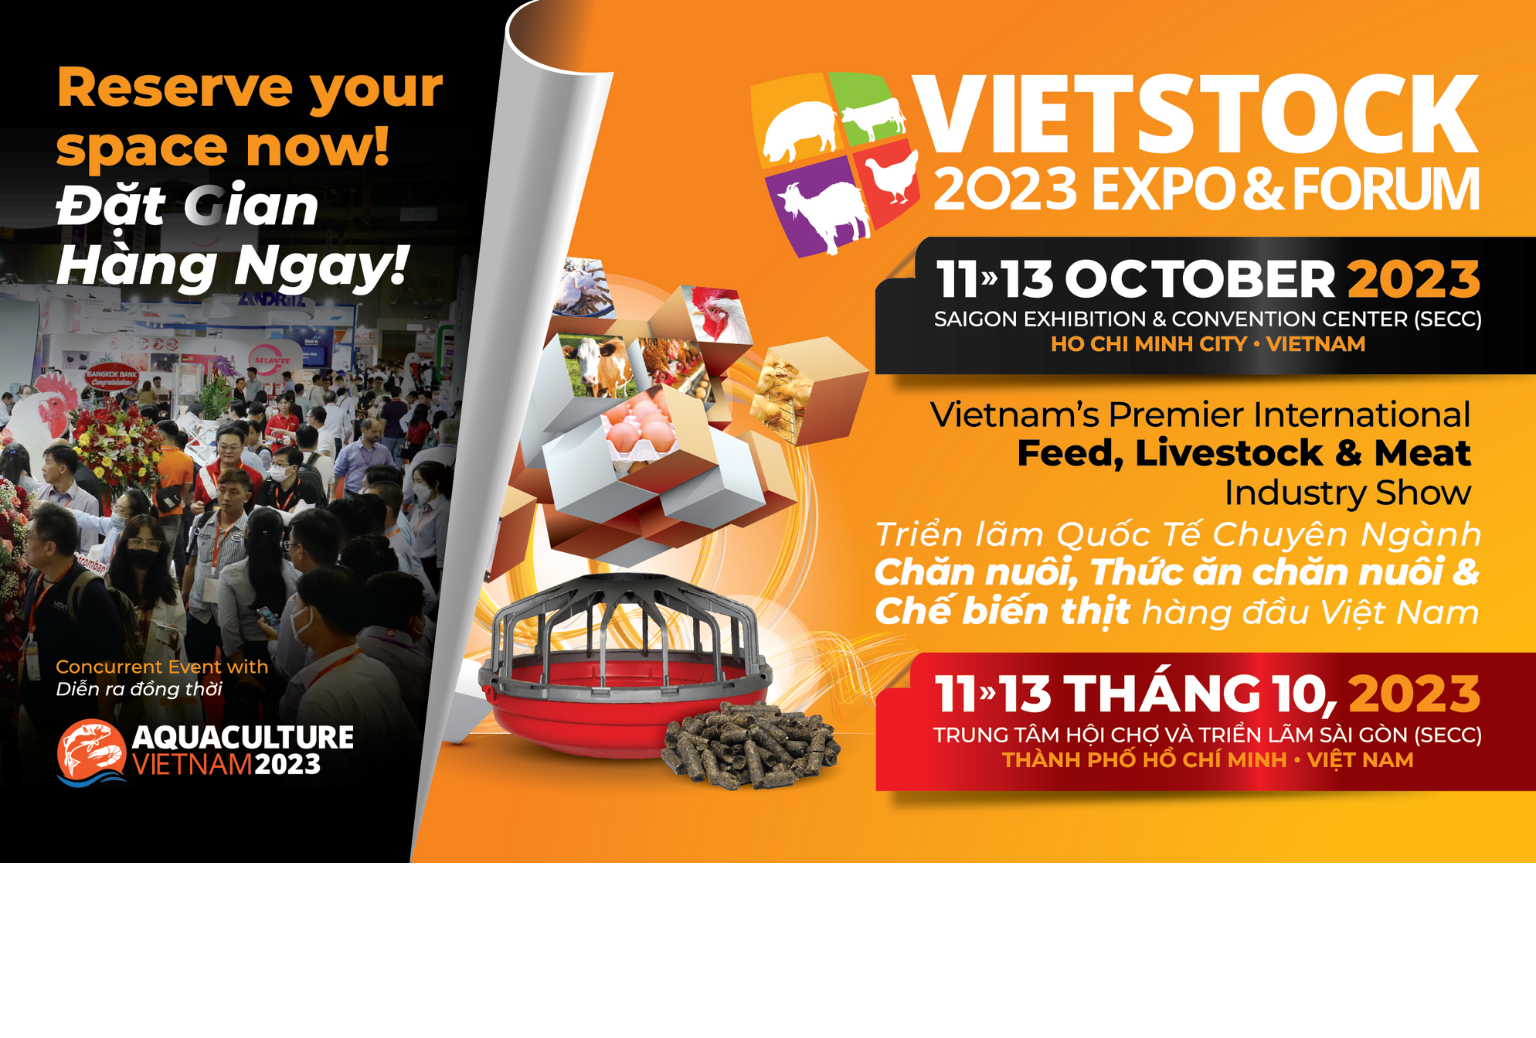 YOUR BUSINESS OPPORTUNITY IS WAVING AT VIETSTOCK 2023!